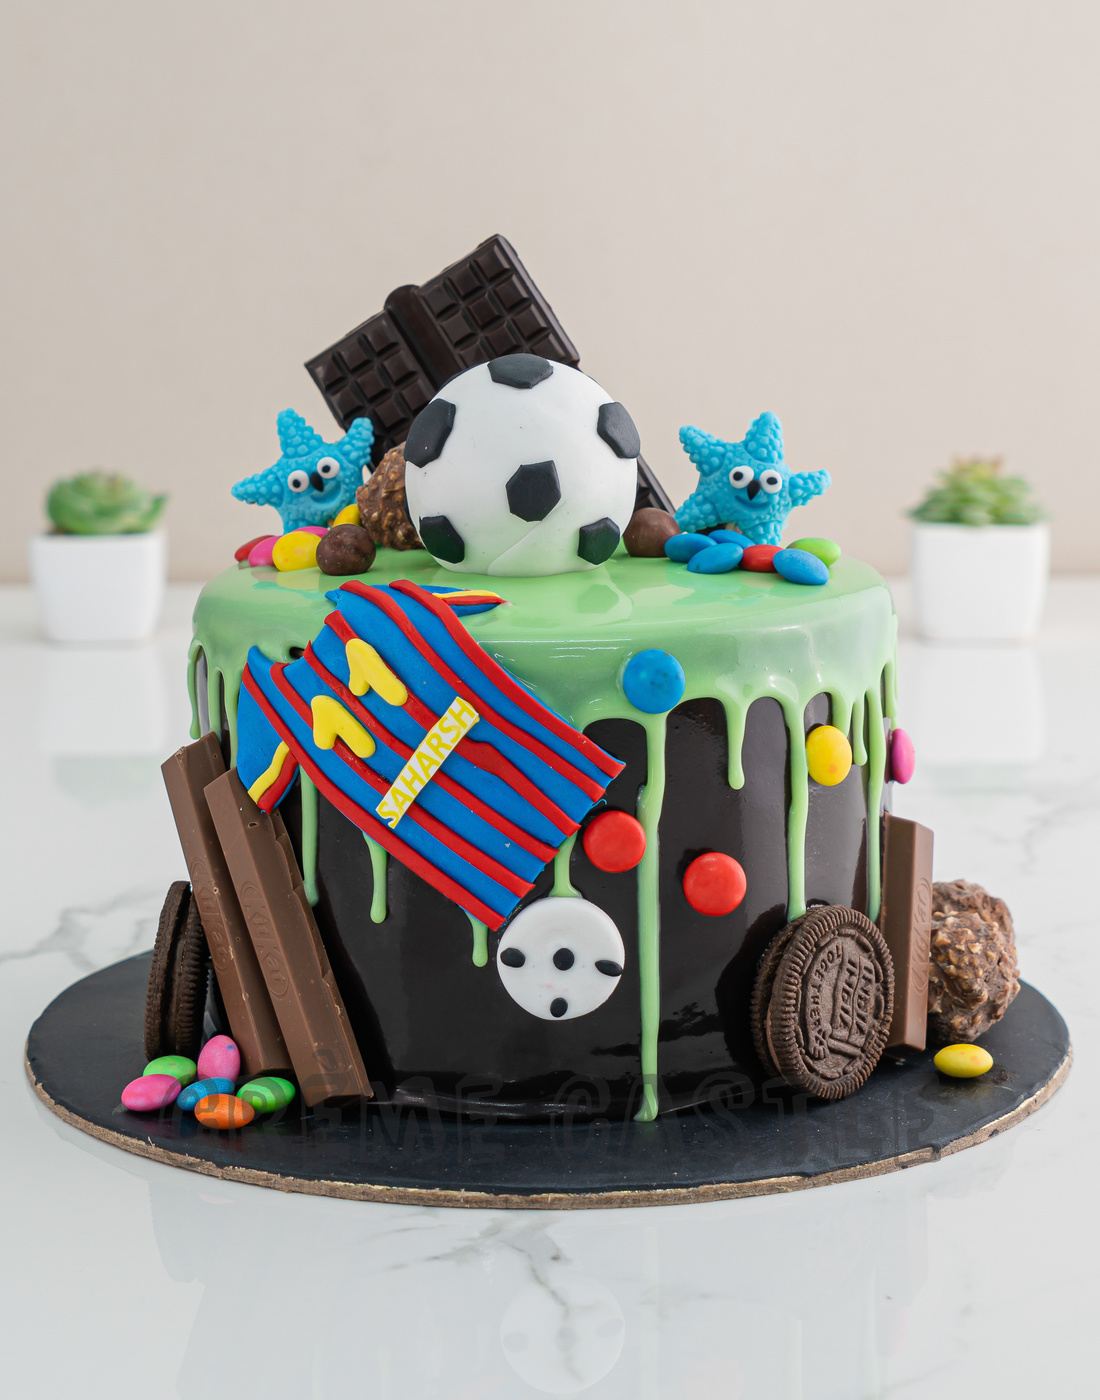 Teen Titans Cake | Cake Delivery in Lagos